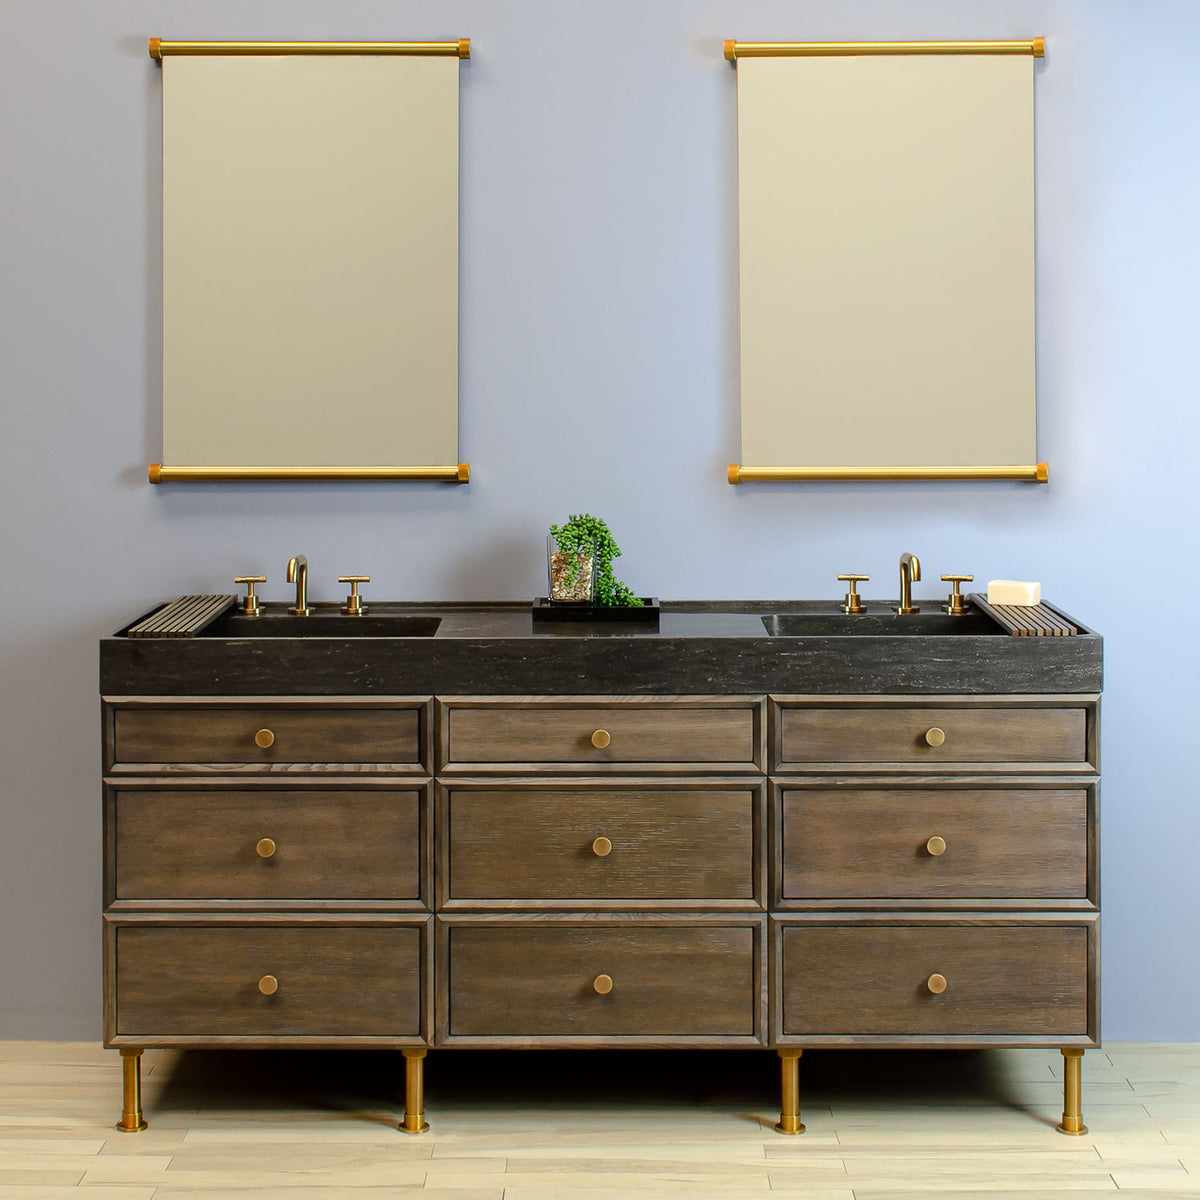 Stone Forest custom Double Basin Ventus with Faucet Deck in antique gray limestone paired with Elemental Classic Vanity in aged brass with Triple Drawer Stacks image 1 of 2